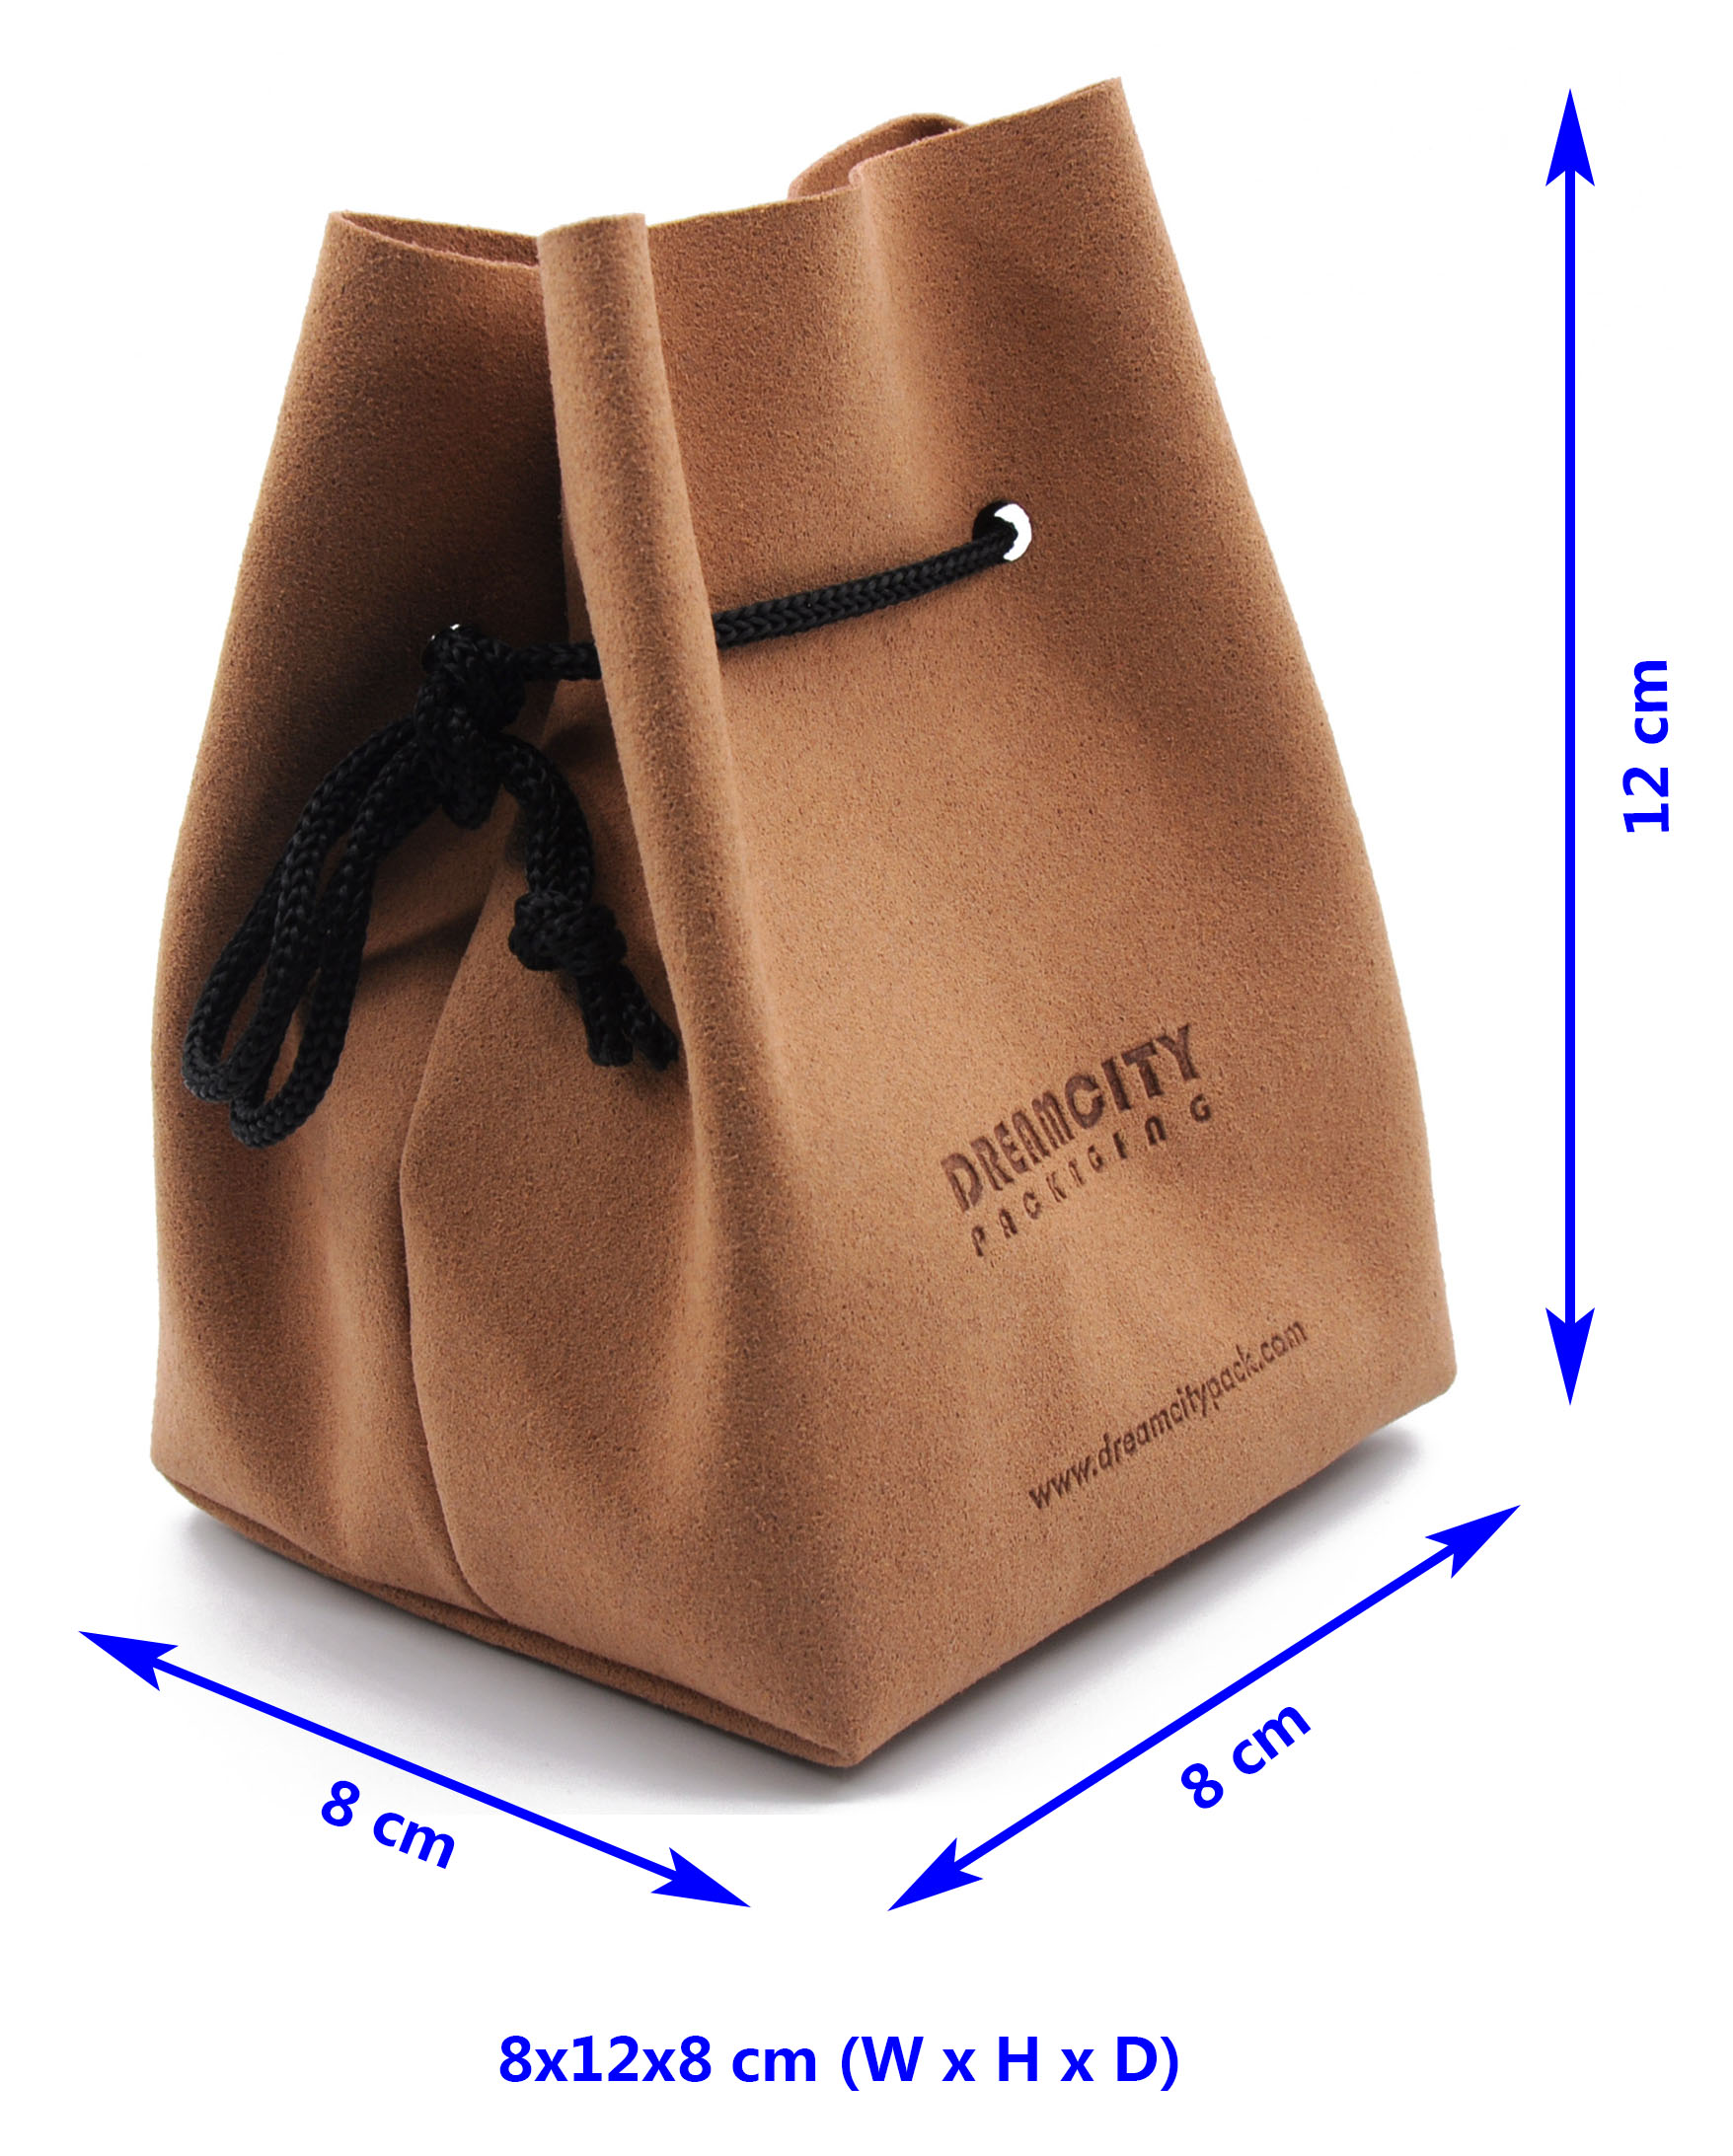 Custom Debossed Suede Leather Drawstring Bags with Square Bottom, Size Diagram.